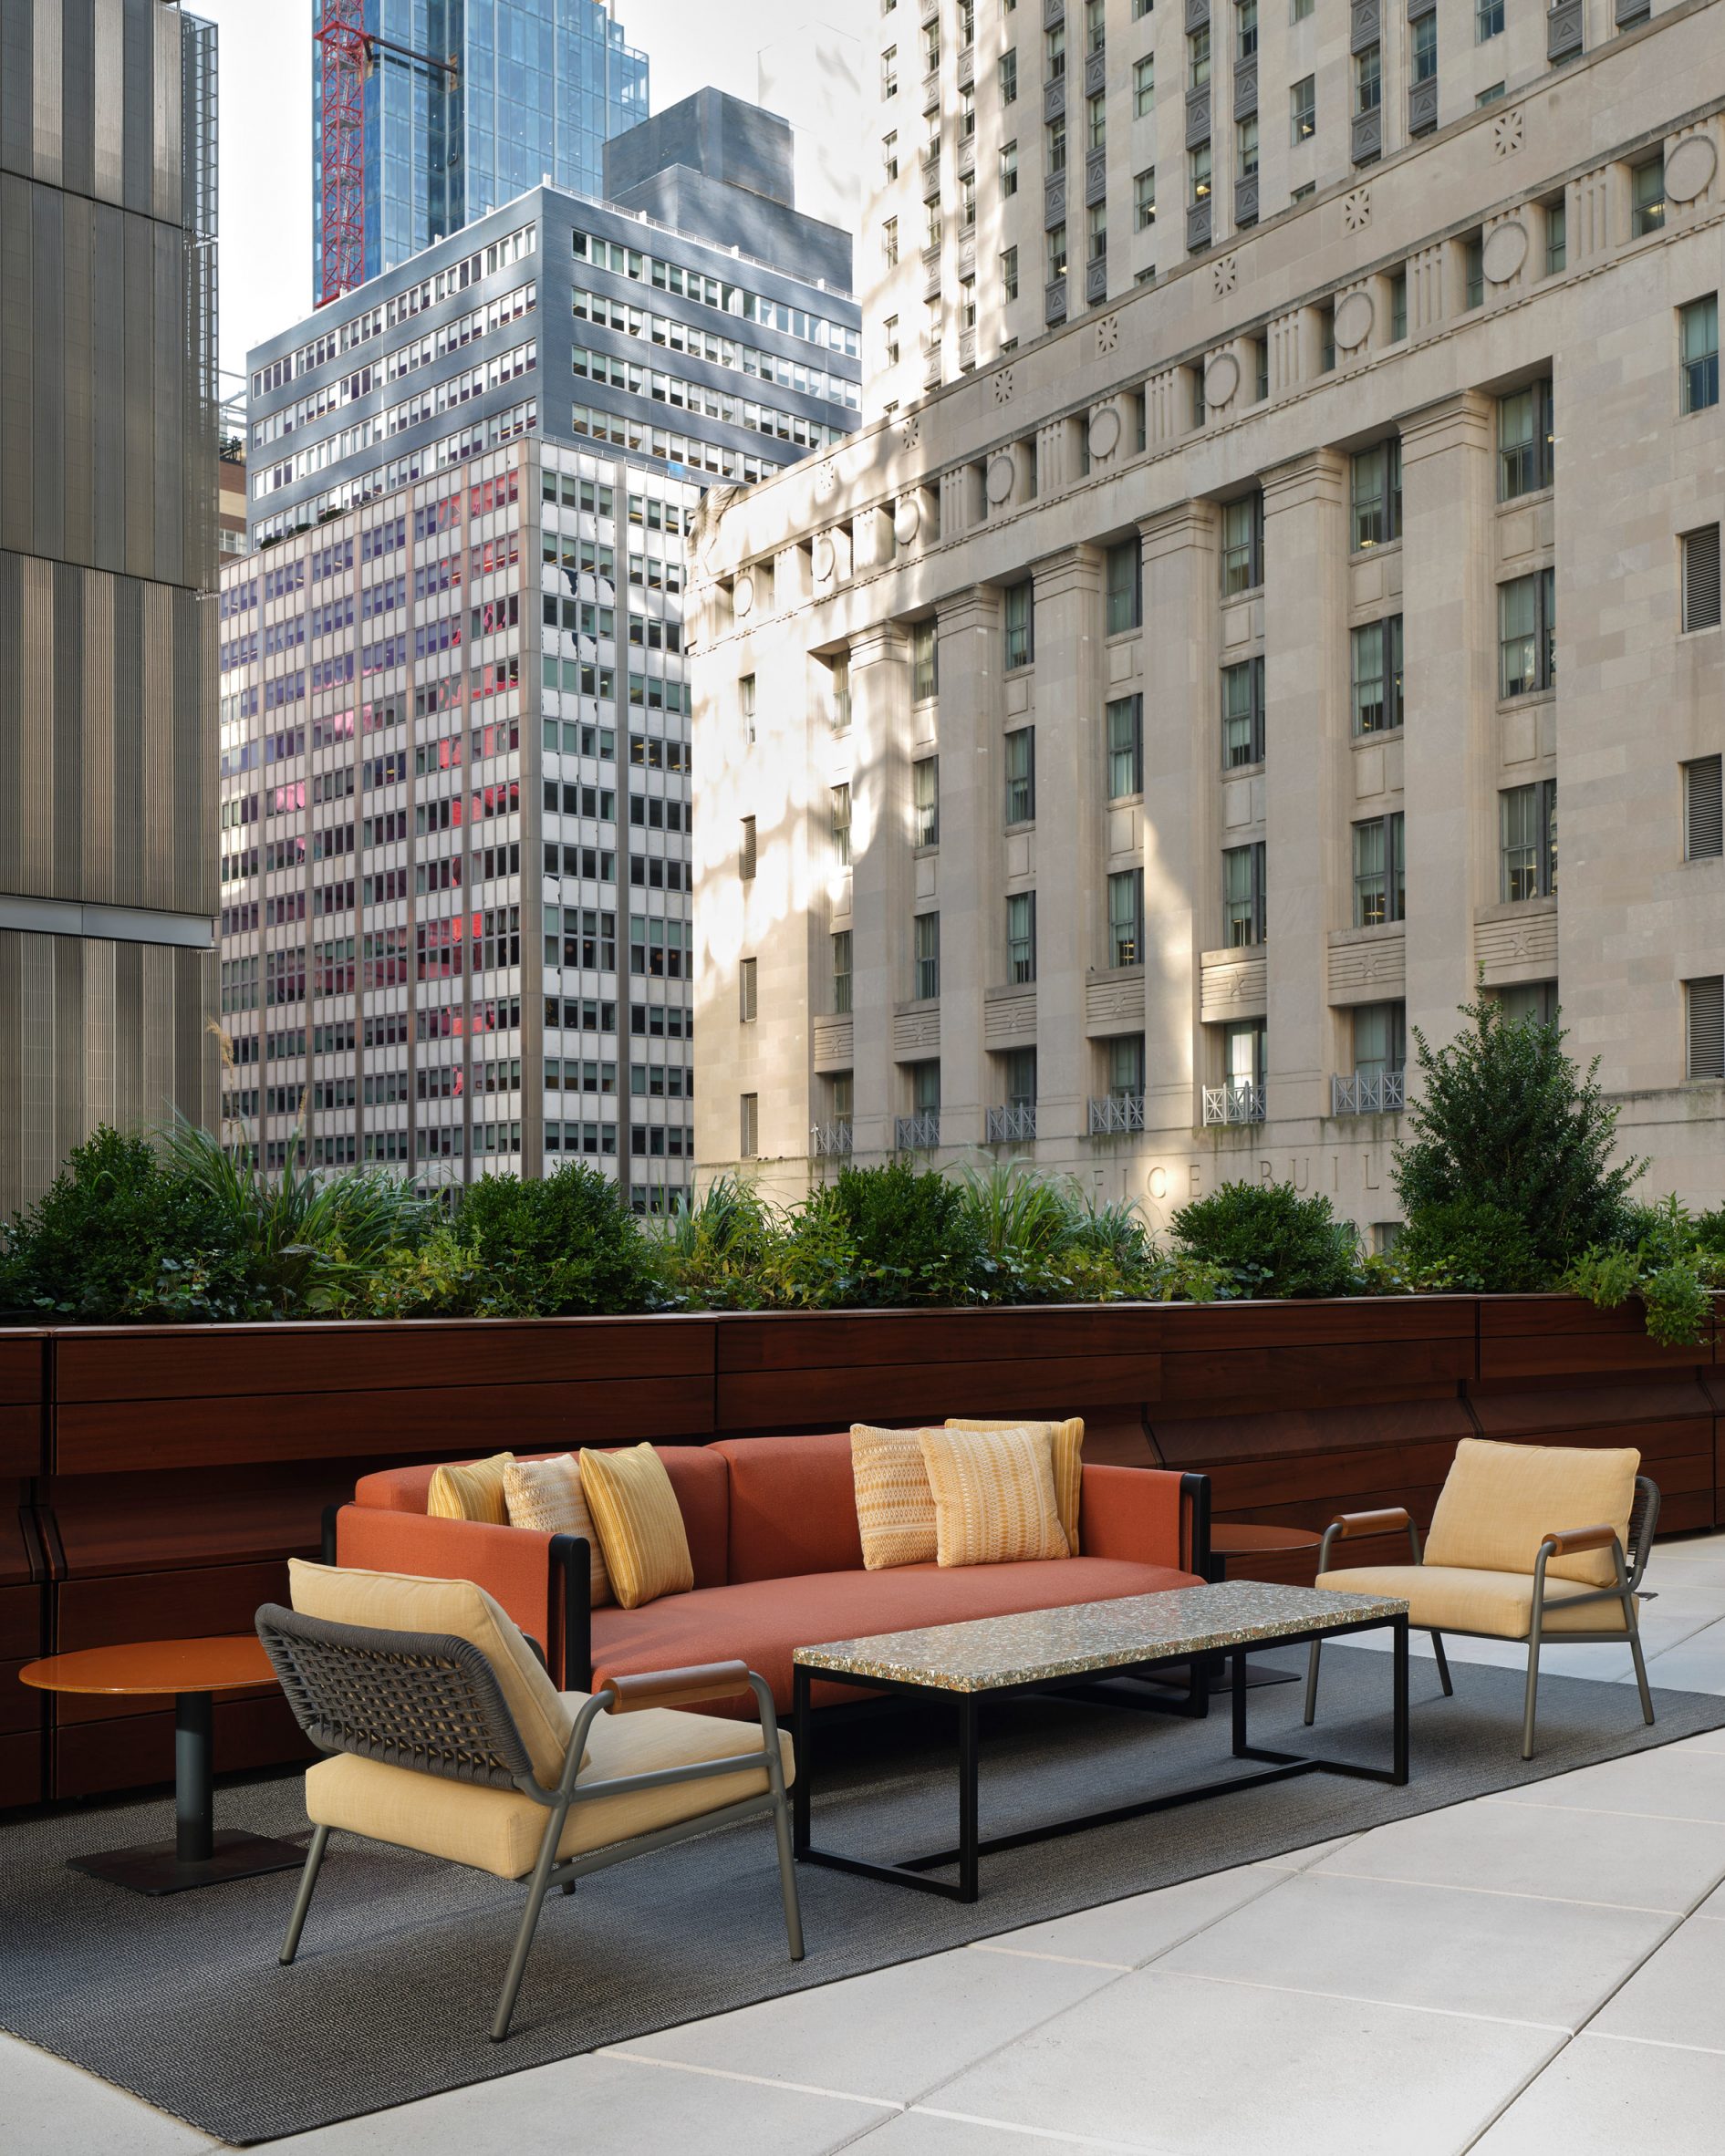 Seating on outdoor terrace with New York skyscrapers in the background